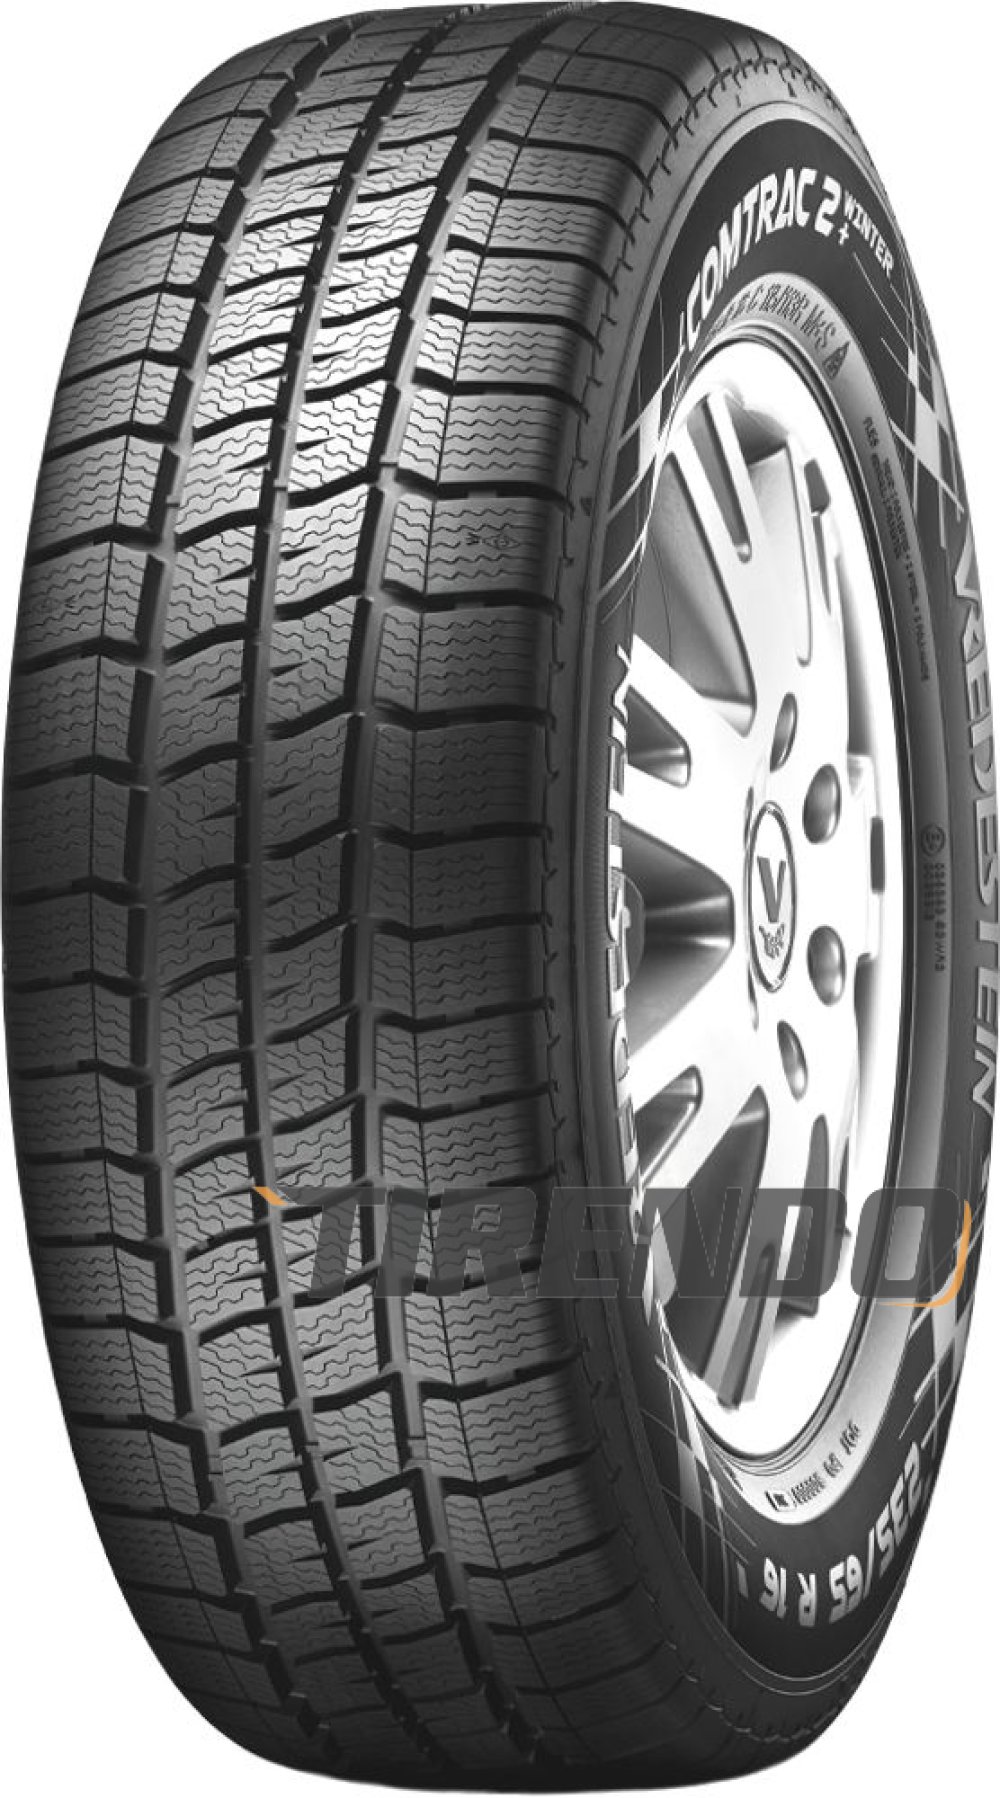 Image of        Vredestein Comtrac 2 Winter + ( 175/70 R14 95/93T )